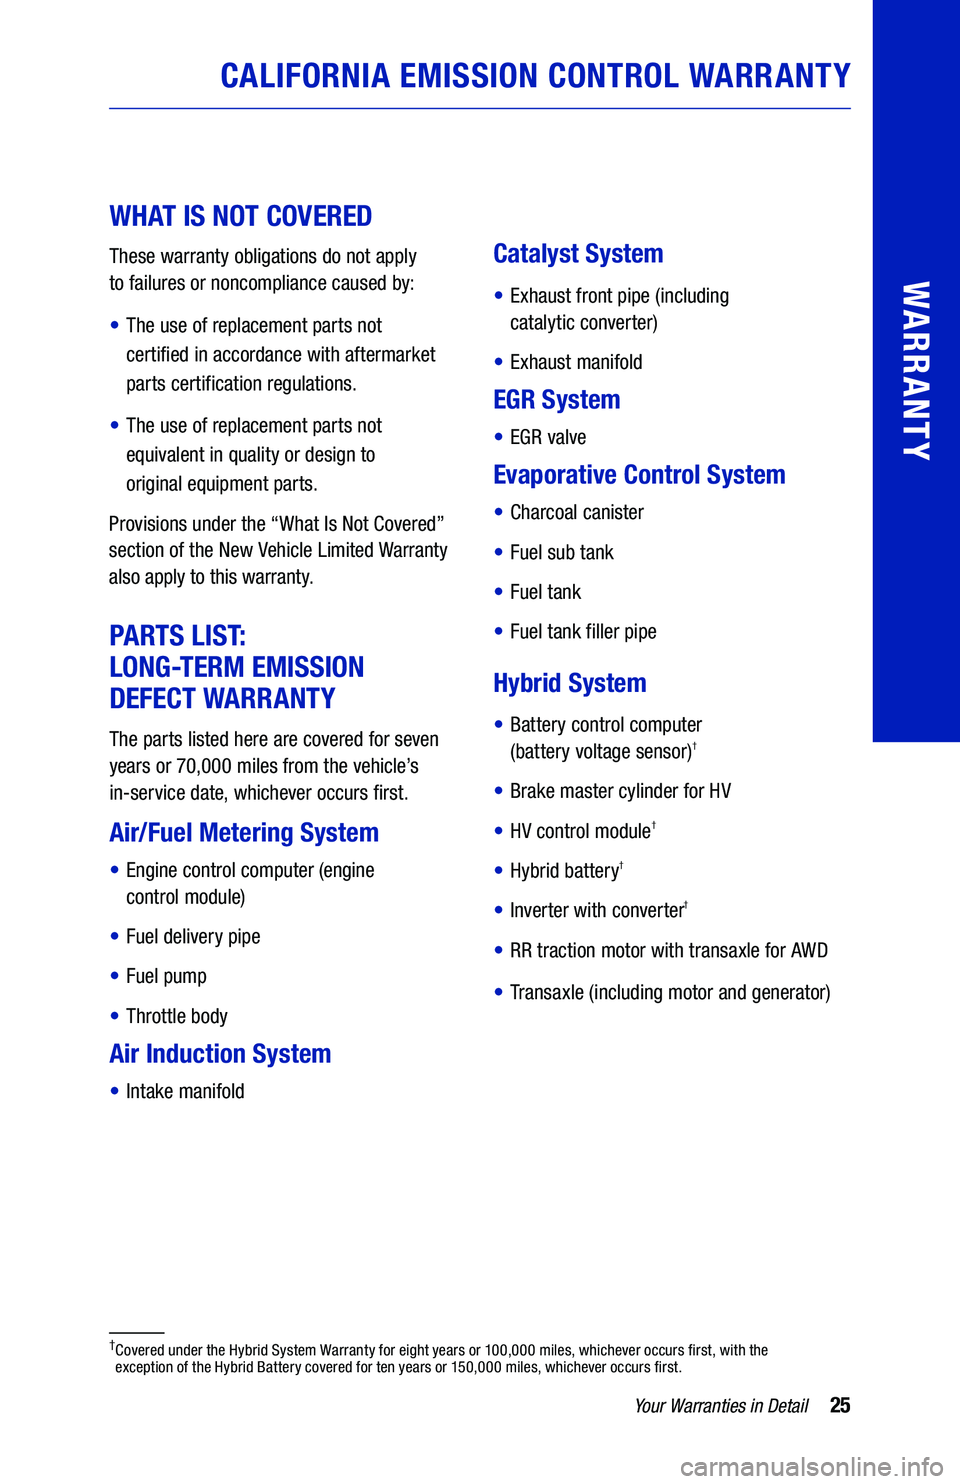 TOYOTA PRIUS 2020  Warranties & Maintenance Guides (in English) 25
 
 
WHAT IS NOT COVERED 
These warranty obligations do not apply  
to failures or noncompliance caused by:
•  The use of replacement parts not  
certified in accordance with aftermarket 
parts ce